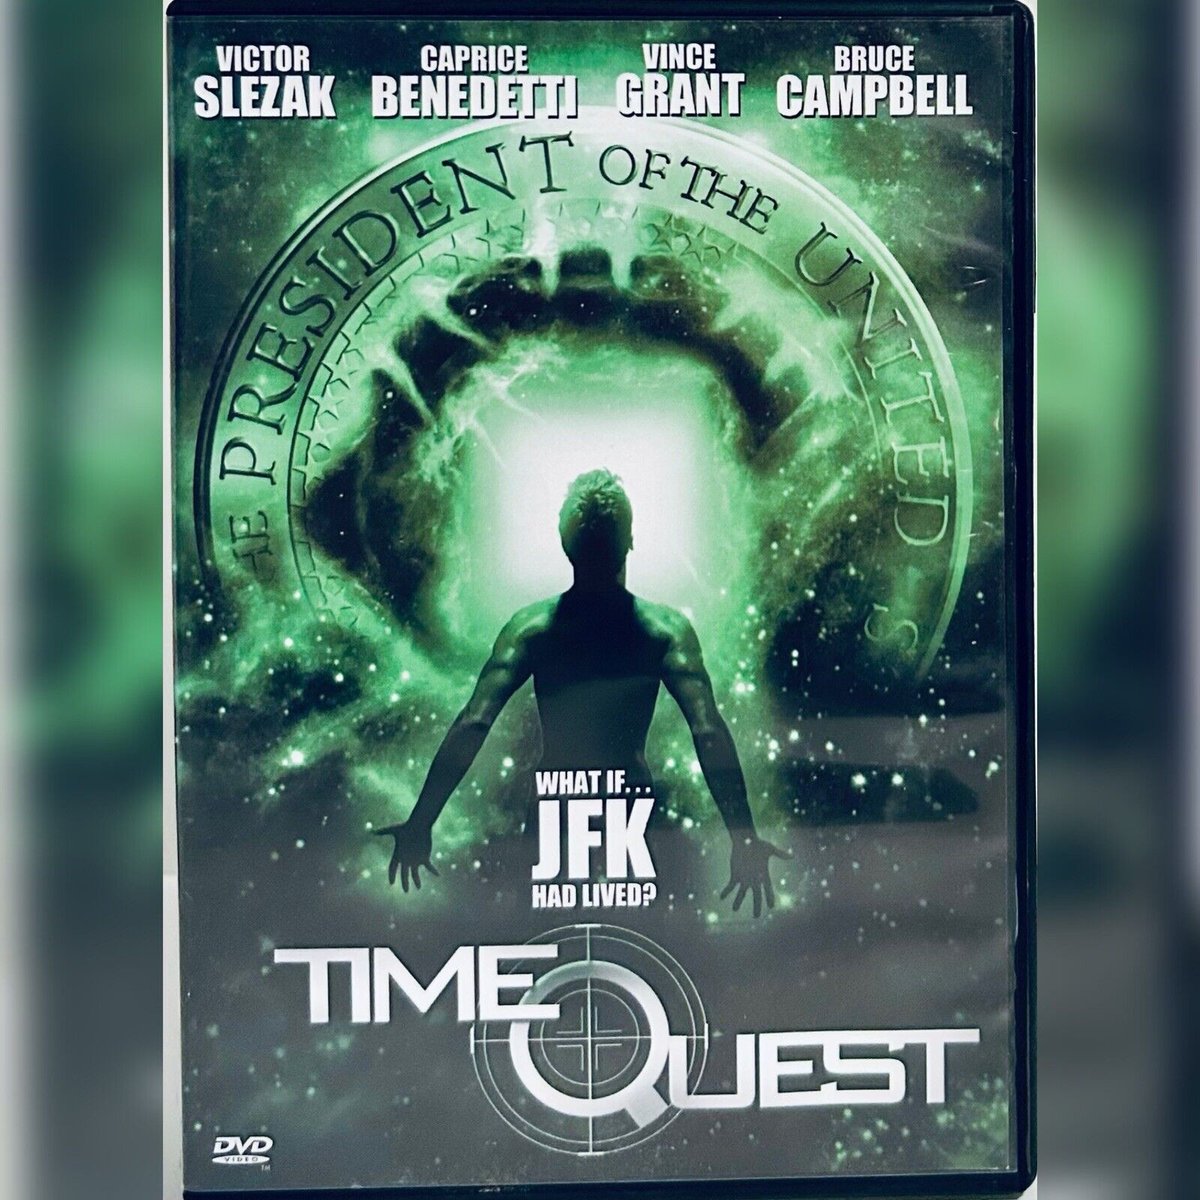 #NewArrival! Time Quest (DVD 2000) Bruce Campbell Victor Slezak Ardustry Home Video JFK SciFi rareflicksplus.com/product-page/t… #TimeQuest #2000s #BruceCampbell #VictorSlezak #ArdustryHomeVideo #JFK #SciFi #SciFiMovie #SciFiCommunity #whatif #DVD #DVDs #PhysicalMedia #Flashback